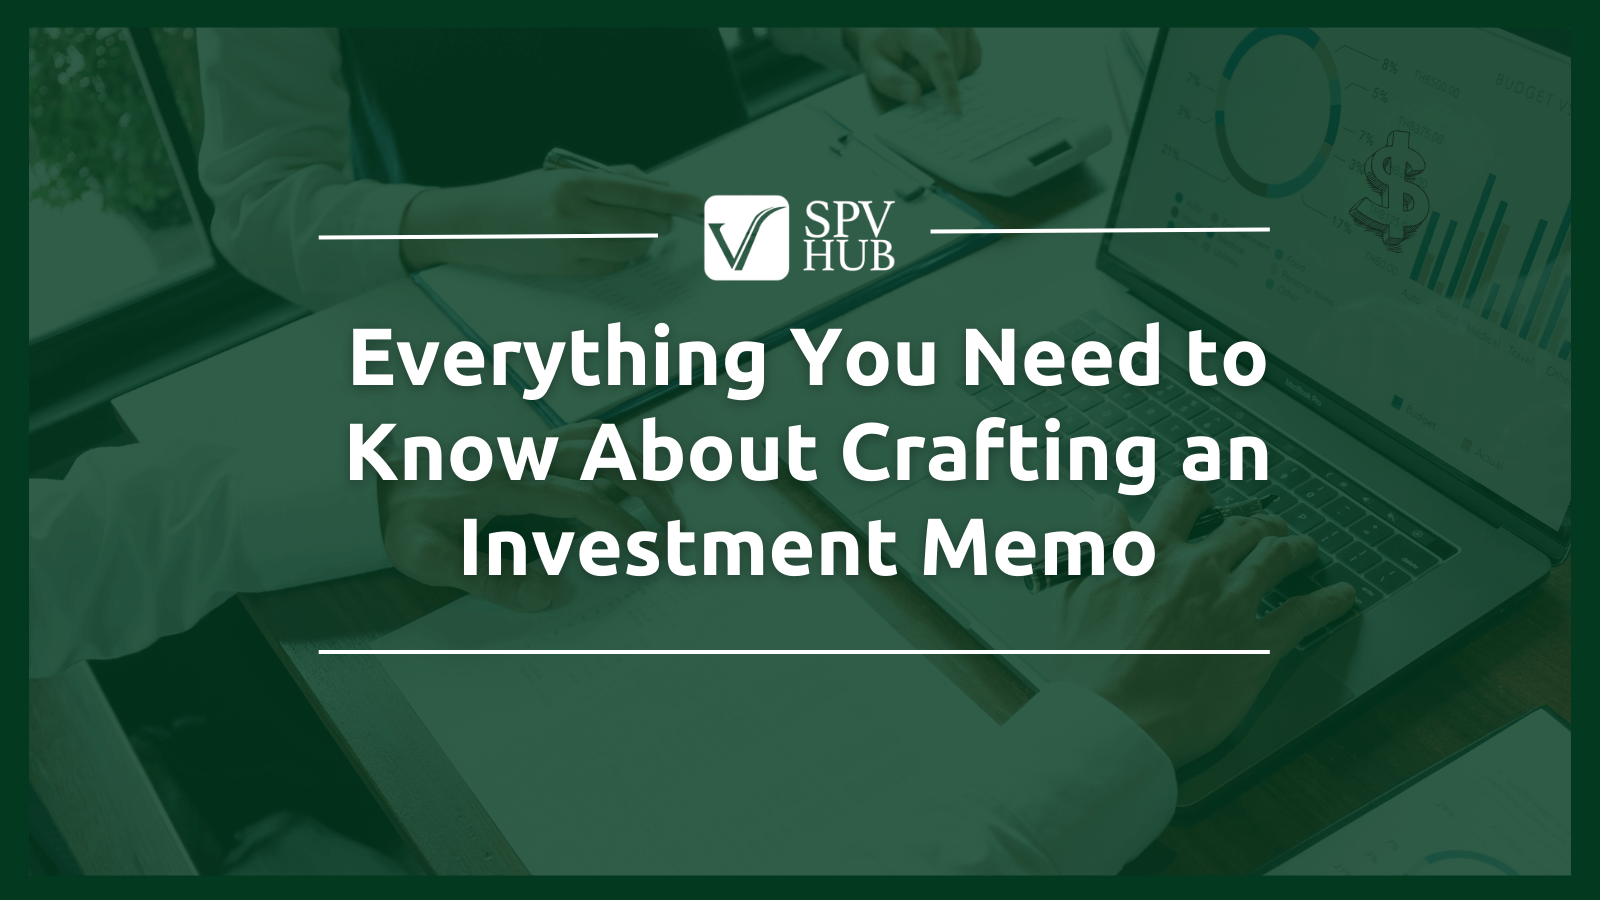 Everything You Need to Know About Crafting an Investment Memo